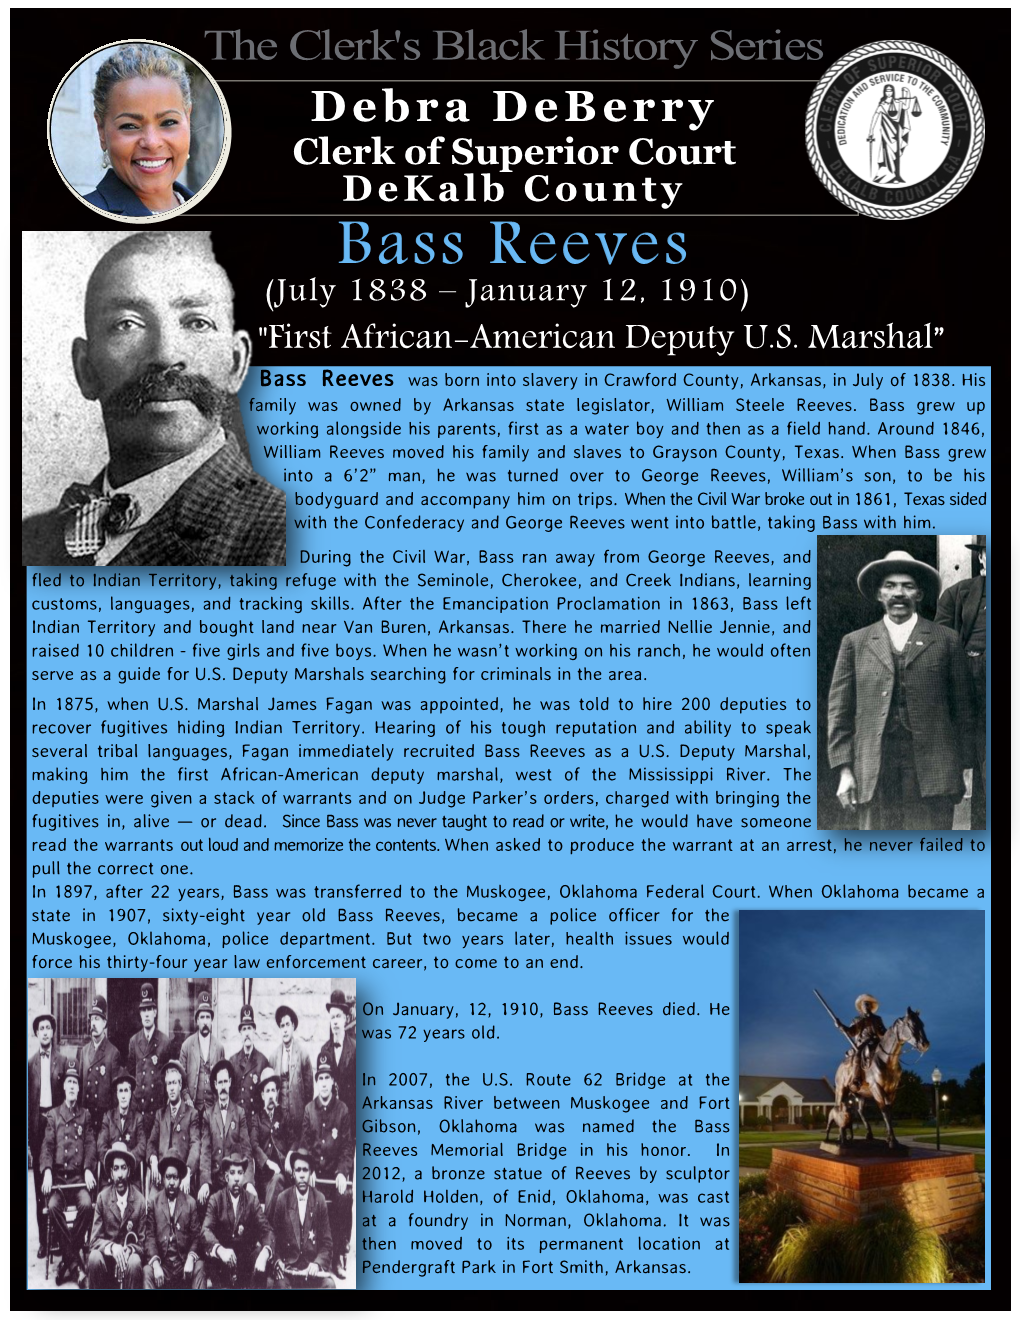 Bass Reeves (July 1838 – January 12, 1910) "First African-American Deputy U.S